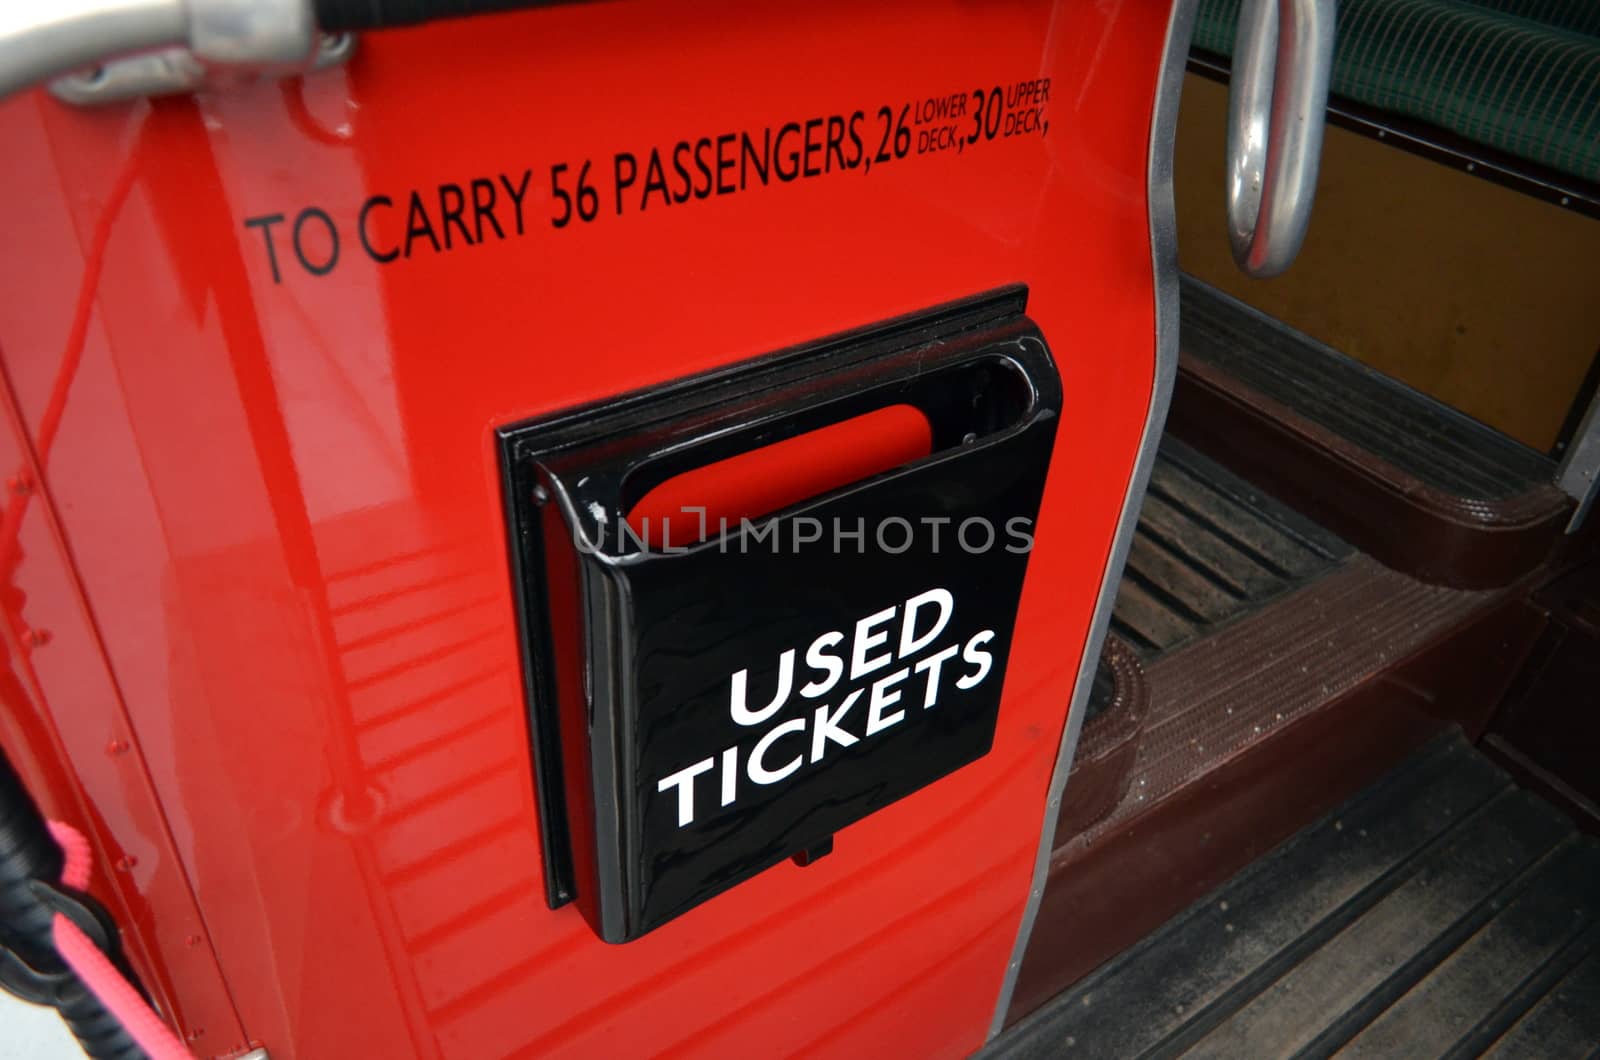 Used ticket bin on the rear entrance of a London 1950 red Routemaster bus.